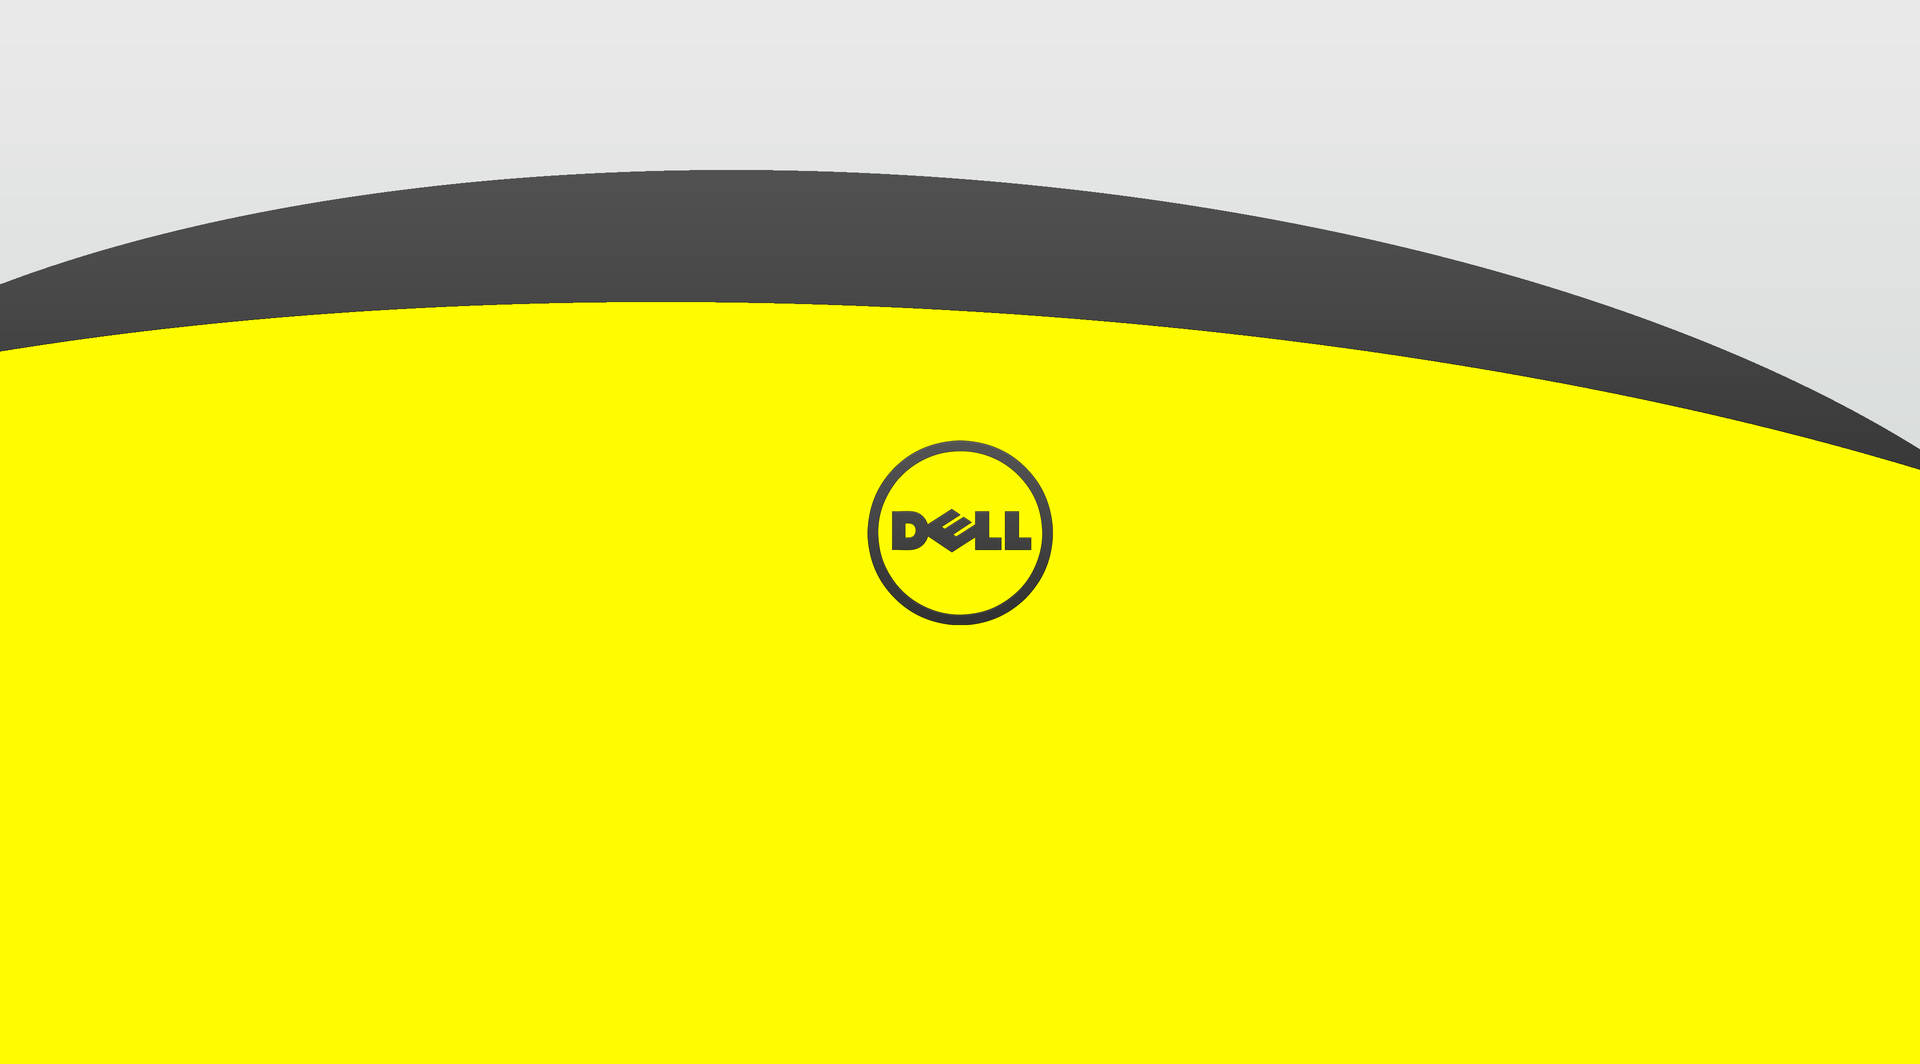 Dell 4k Logo On Yellow Background